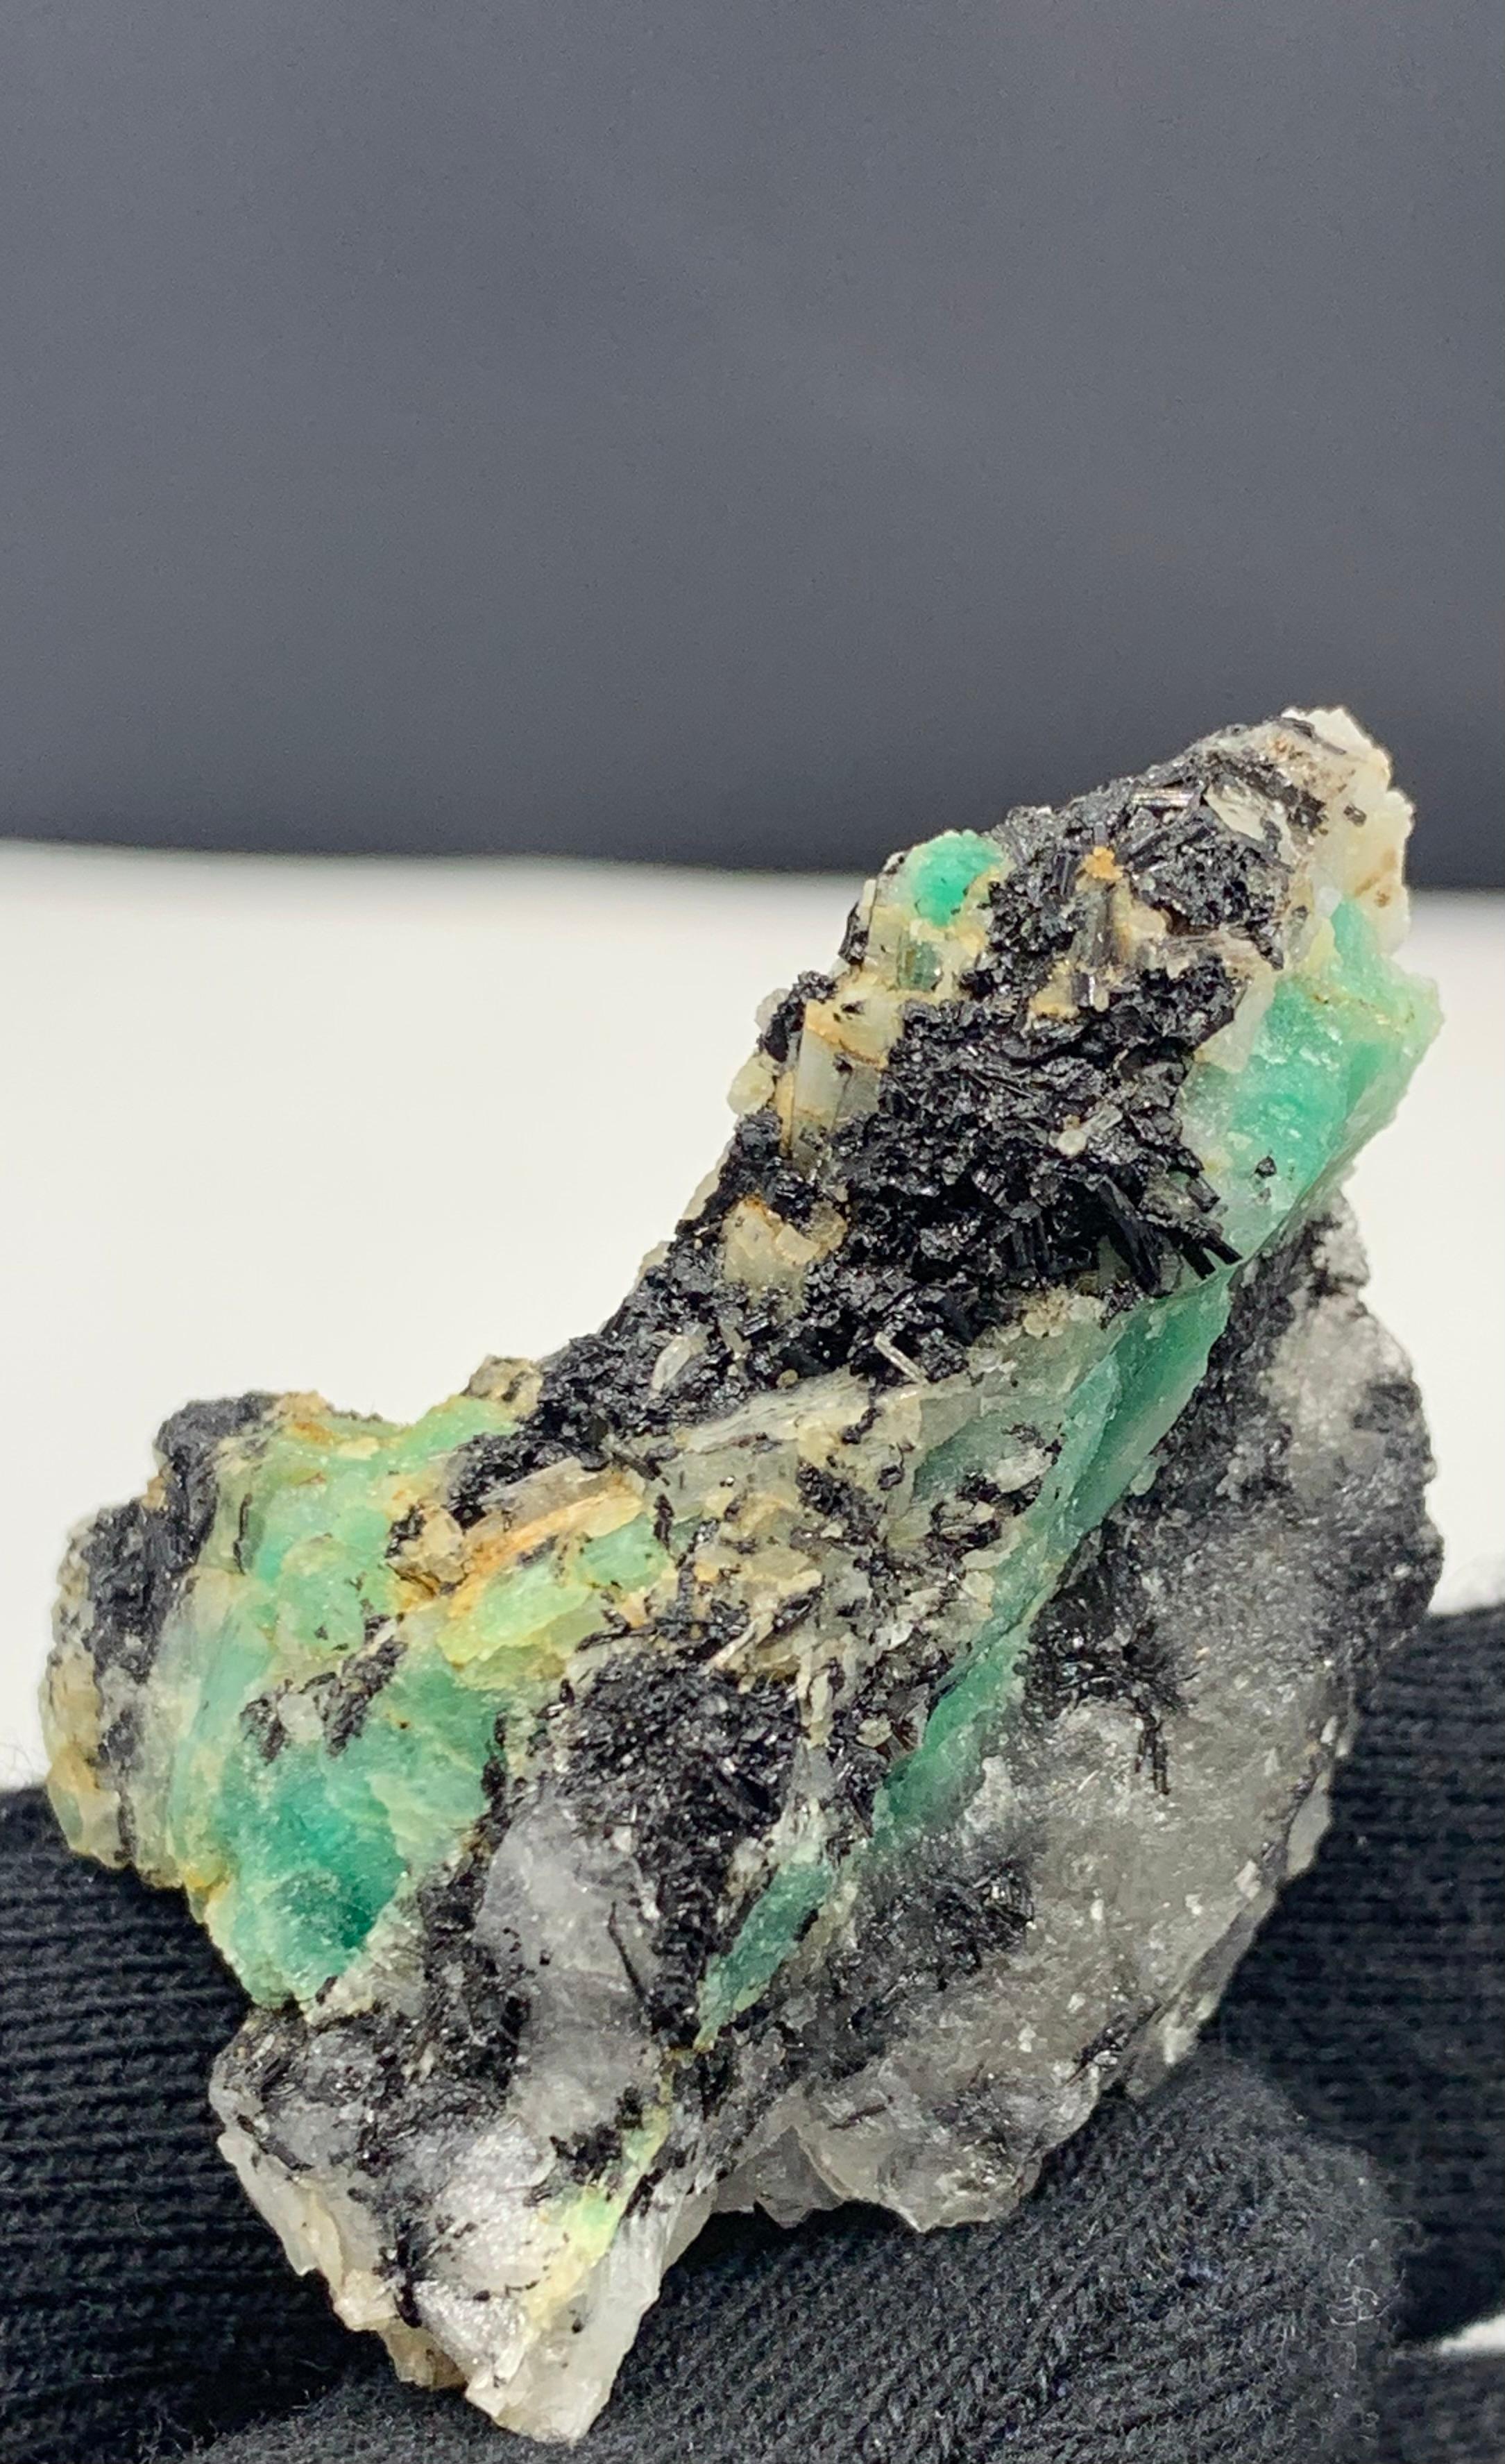 20.98 Gram Lovely Emerald Specimen From Chitral Valley, Pakistan 

Weight: 20.98 Gram 
Dimension: 4.6 x 3.6 x 1.9 Cm
Origin: Chitral Valley, Khyber Pukhtunkhuwa Province, Pakistan 

Emerald has the chemical composition Be3Al2(SiO3)6 and is